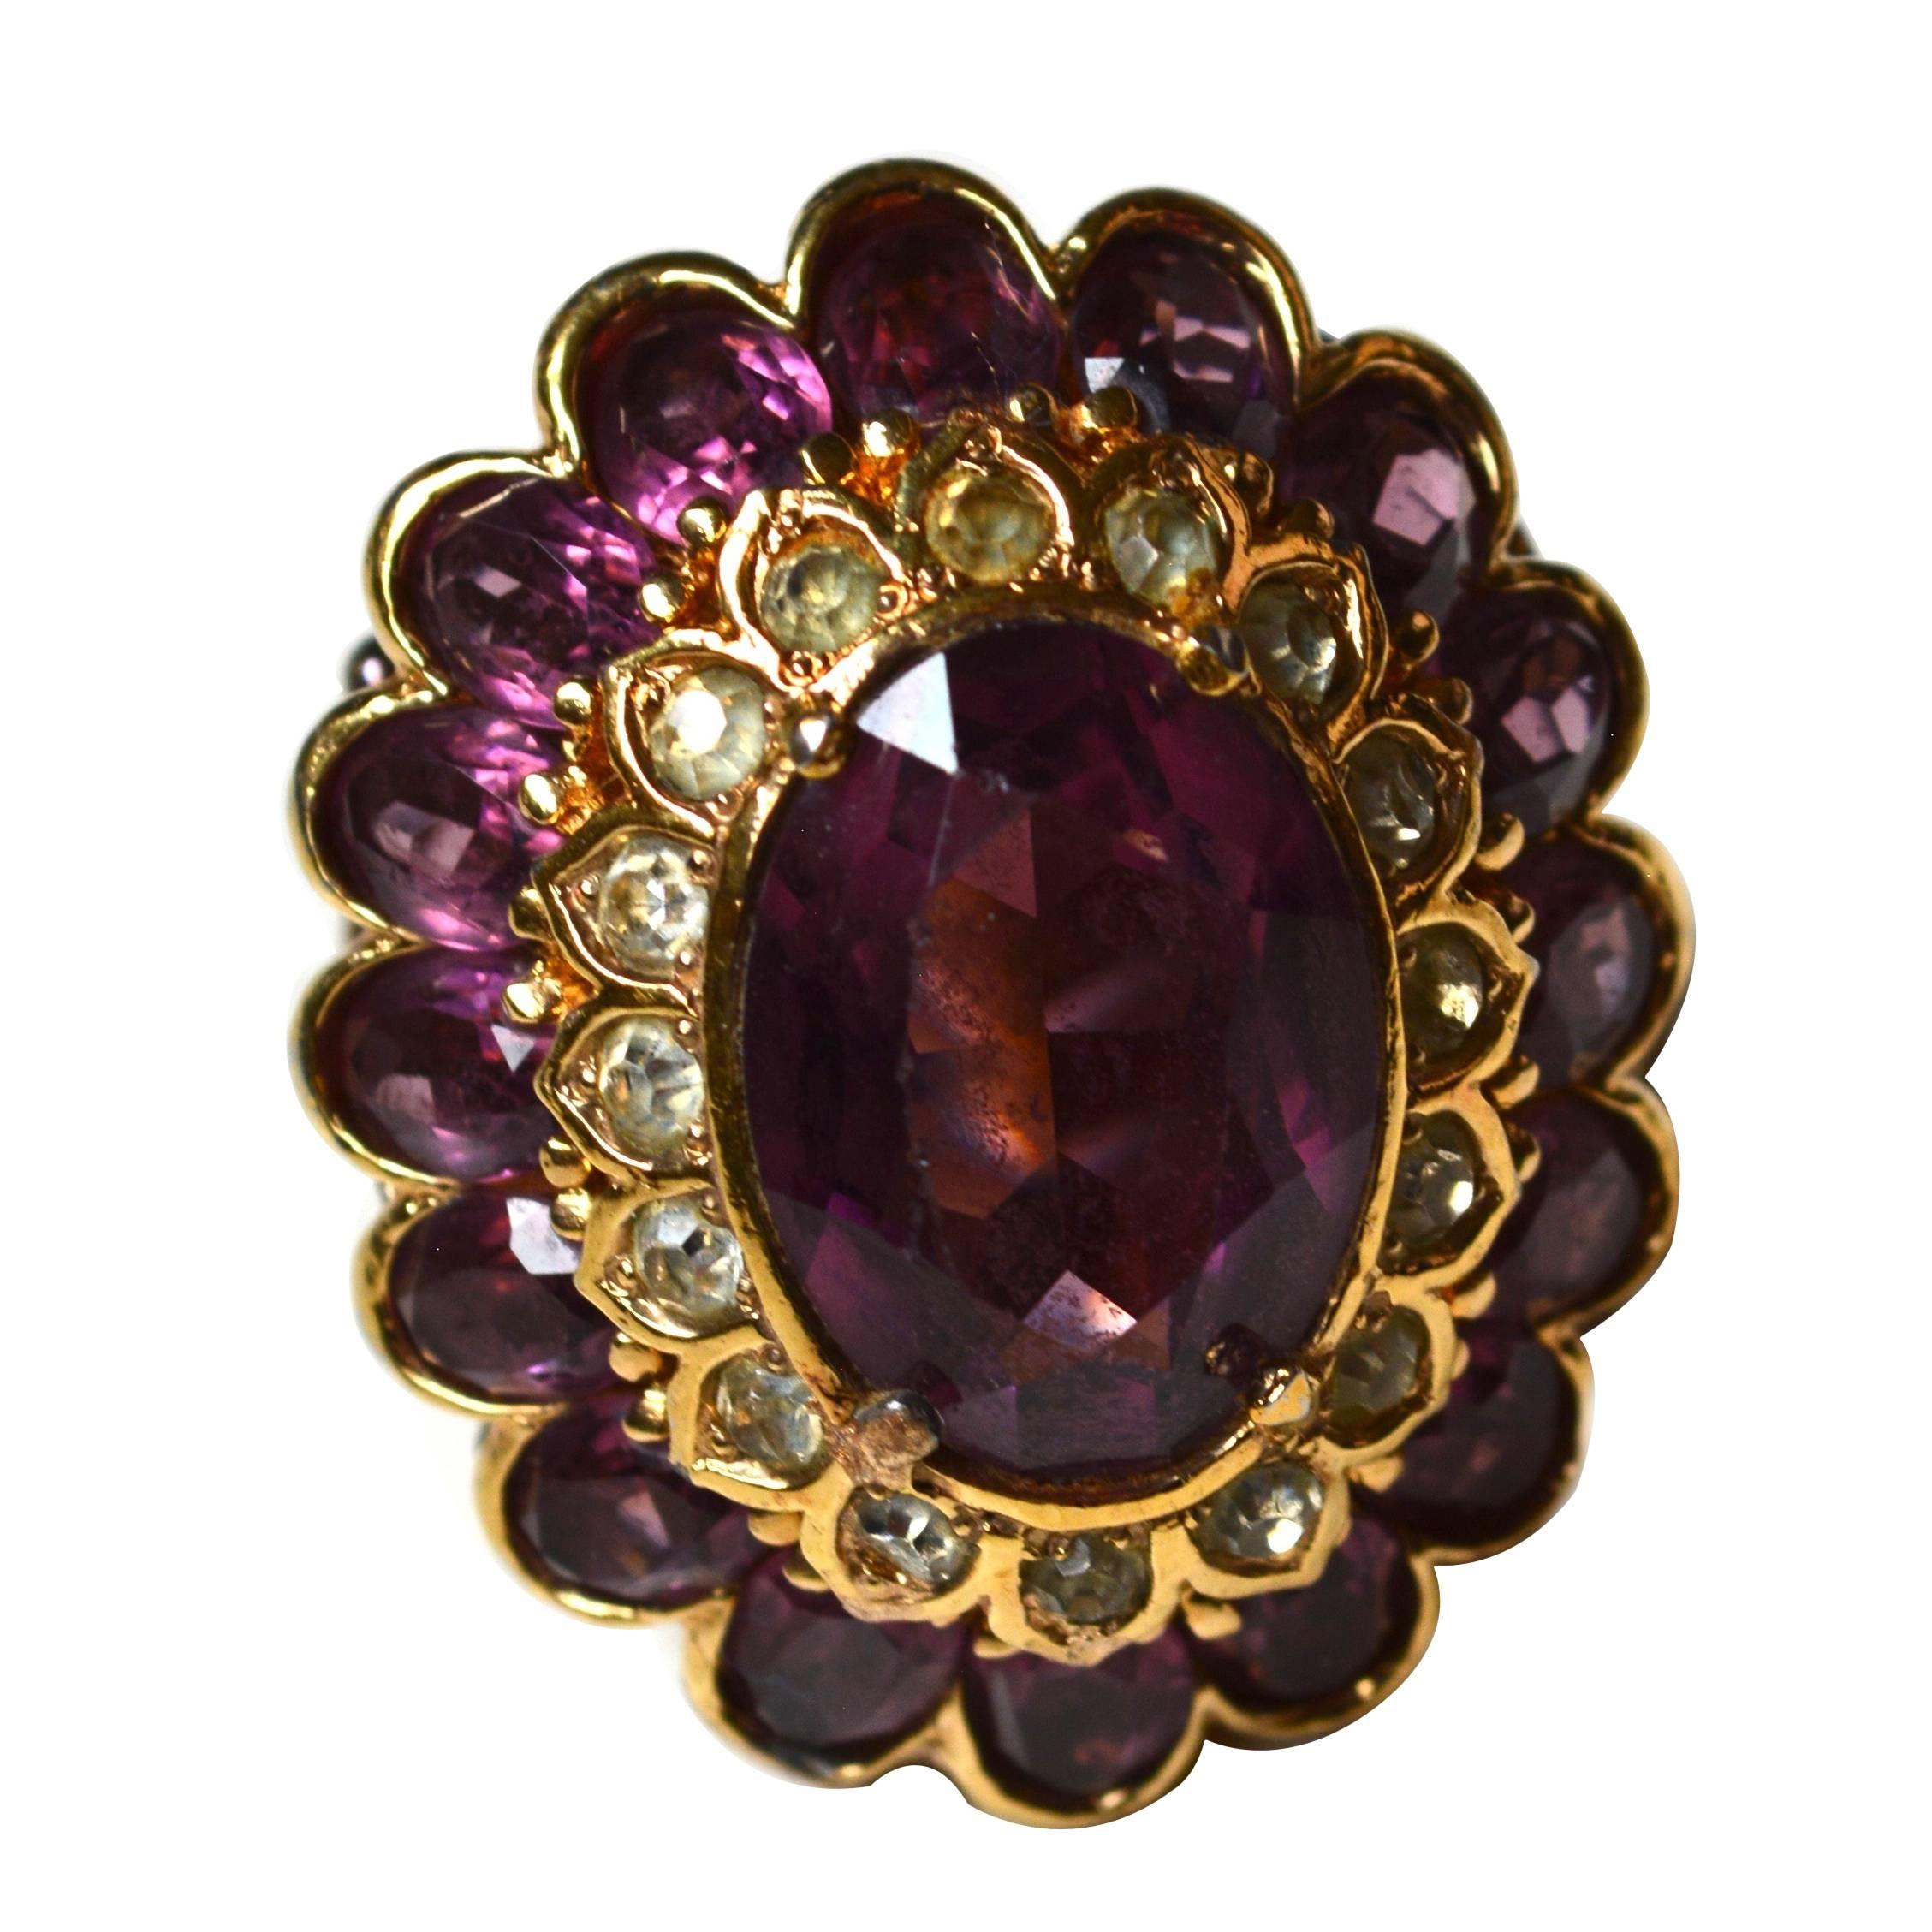 Oversized Vintage Panetta Cocktail Ring